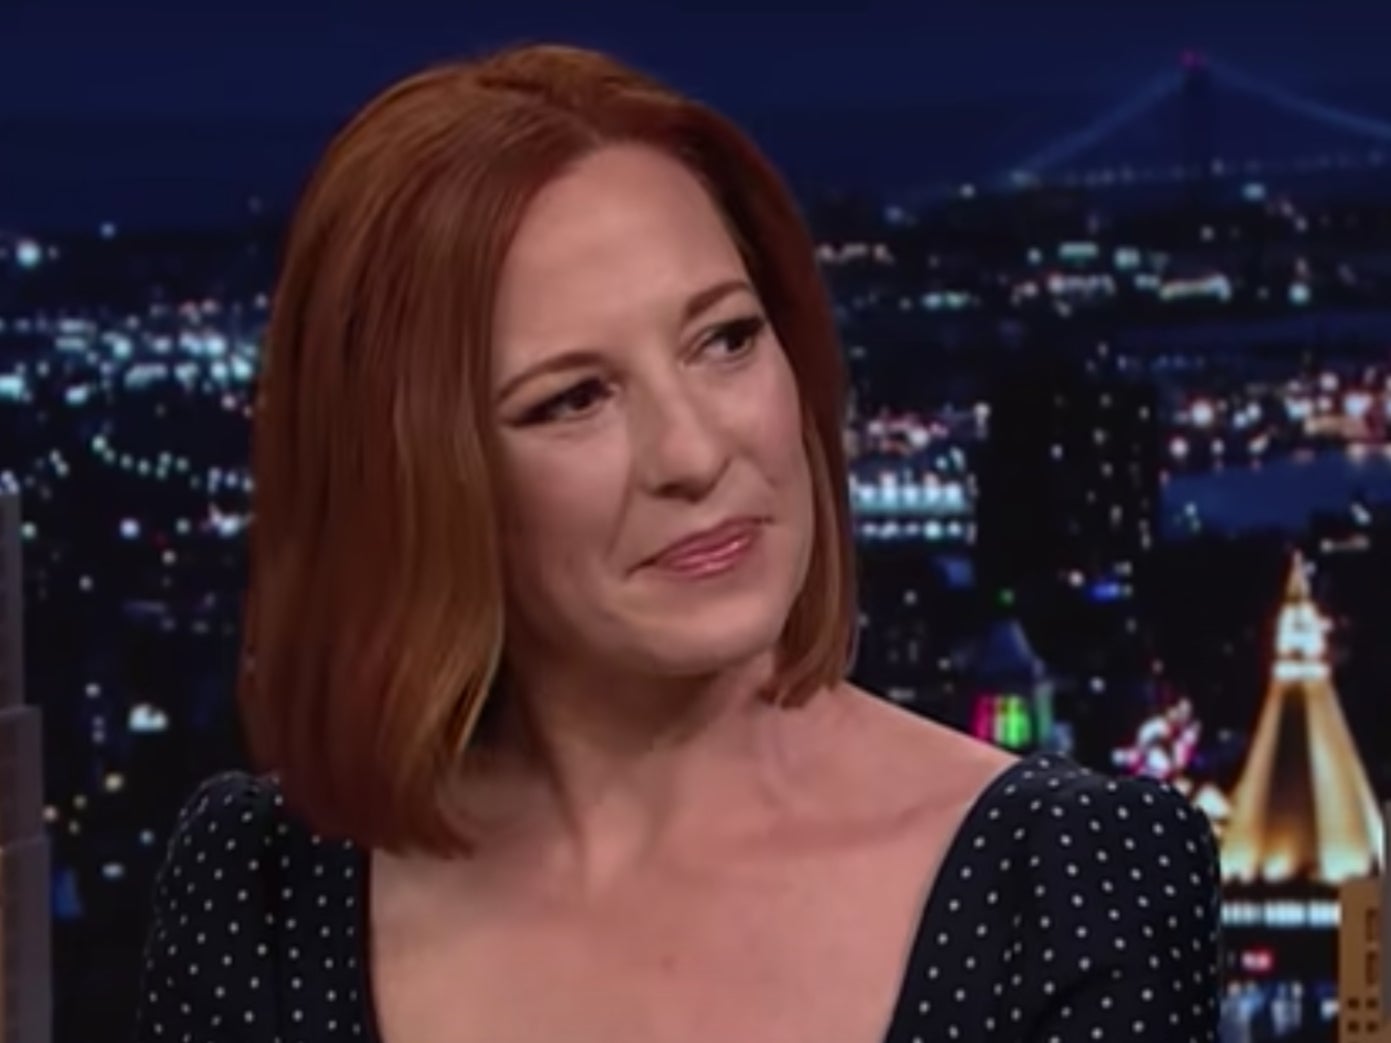 Former White House Press Secretary Jen Psaki appears on The Tonight Show with Jimmy Fallon and discusses the Uvalde mass shooting.